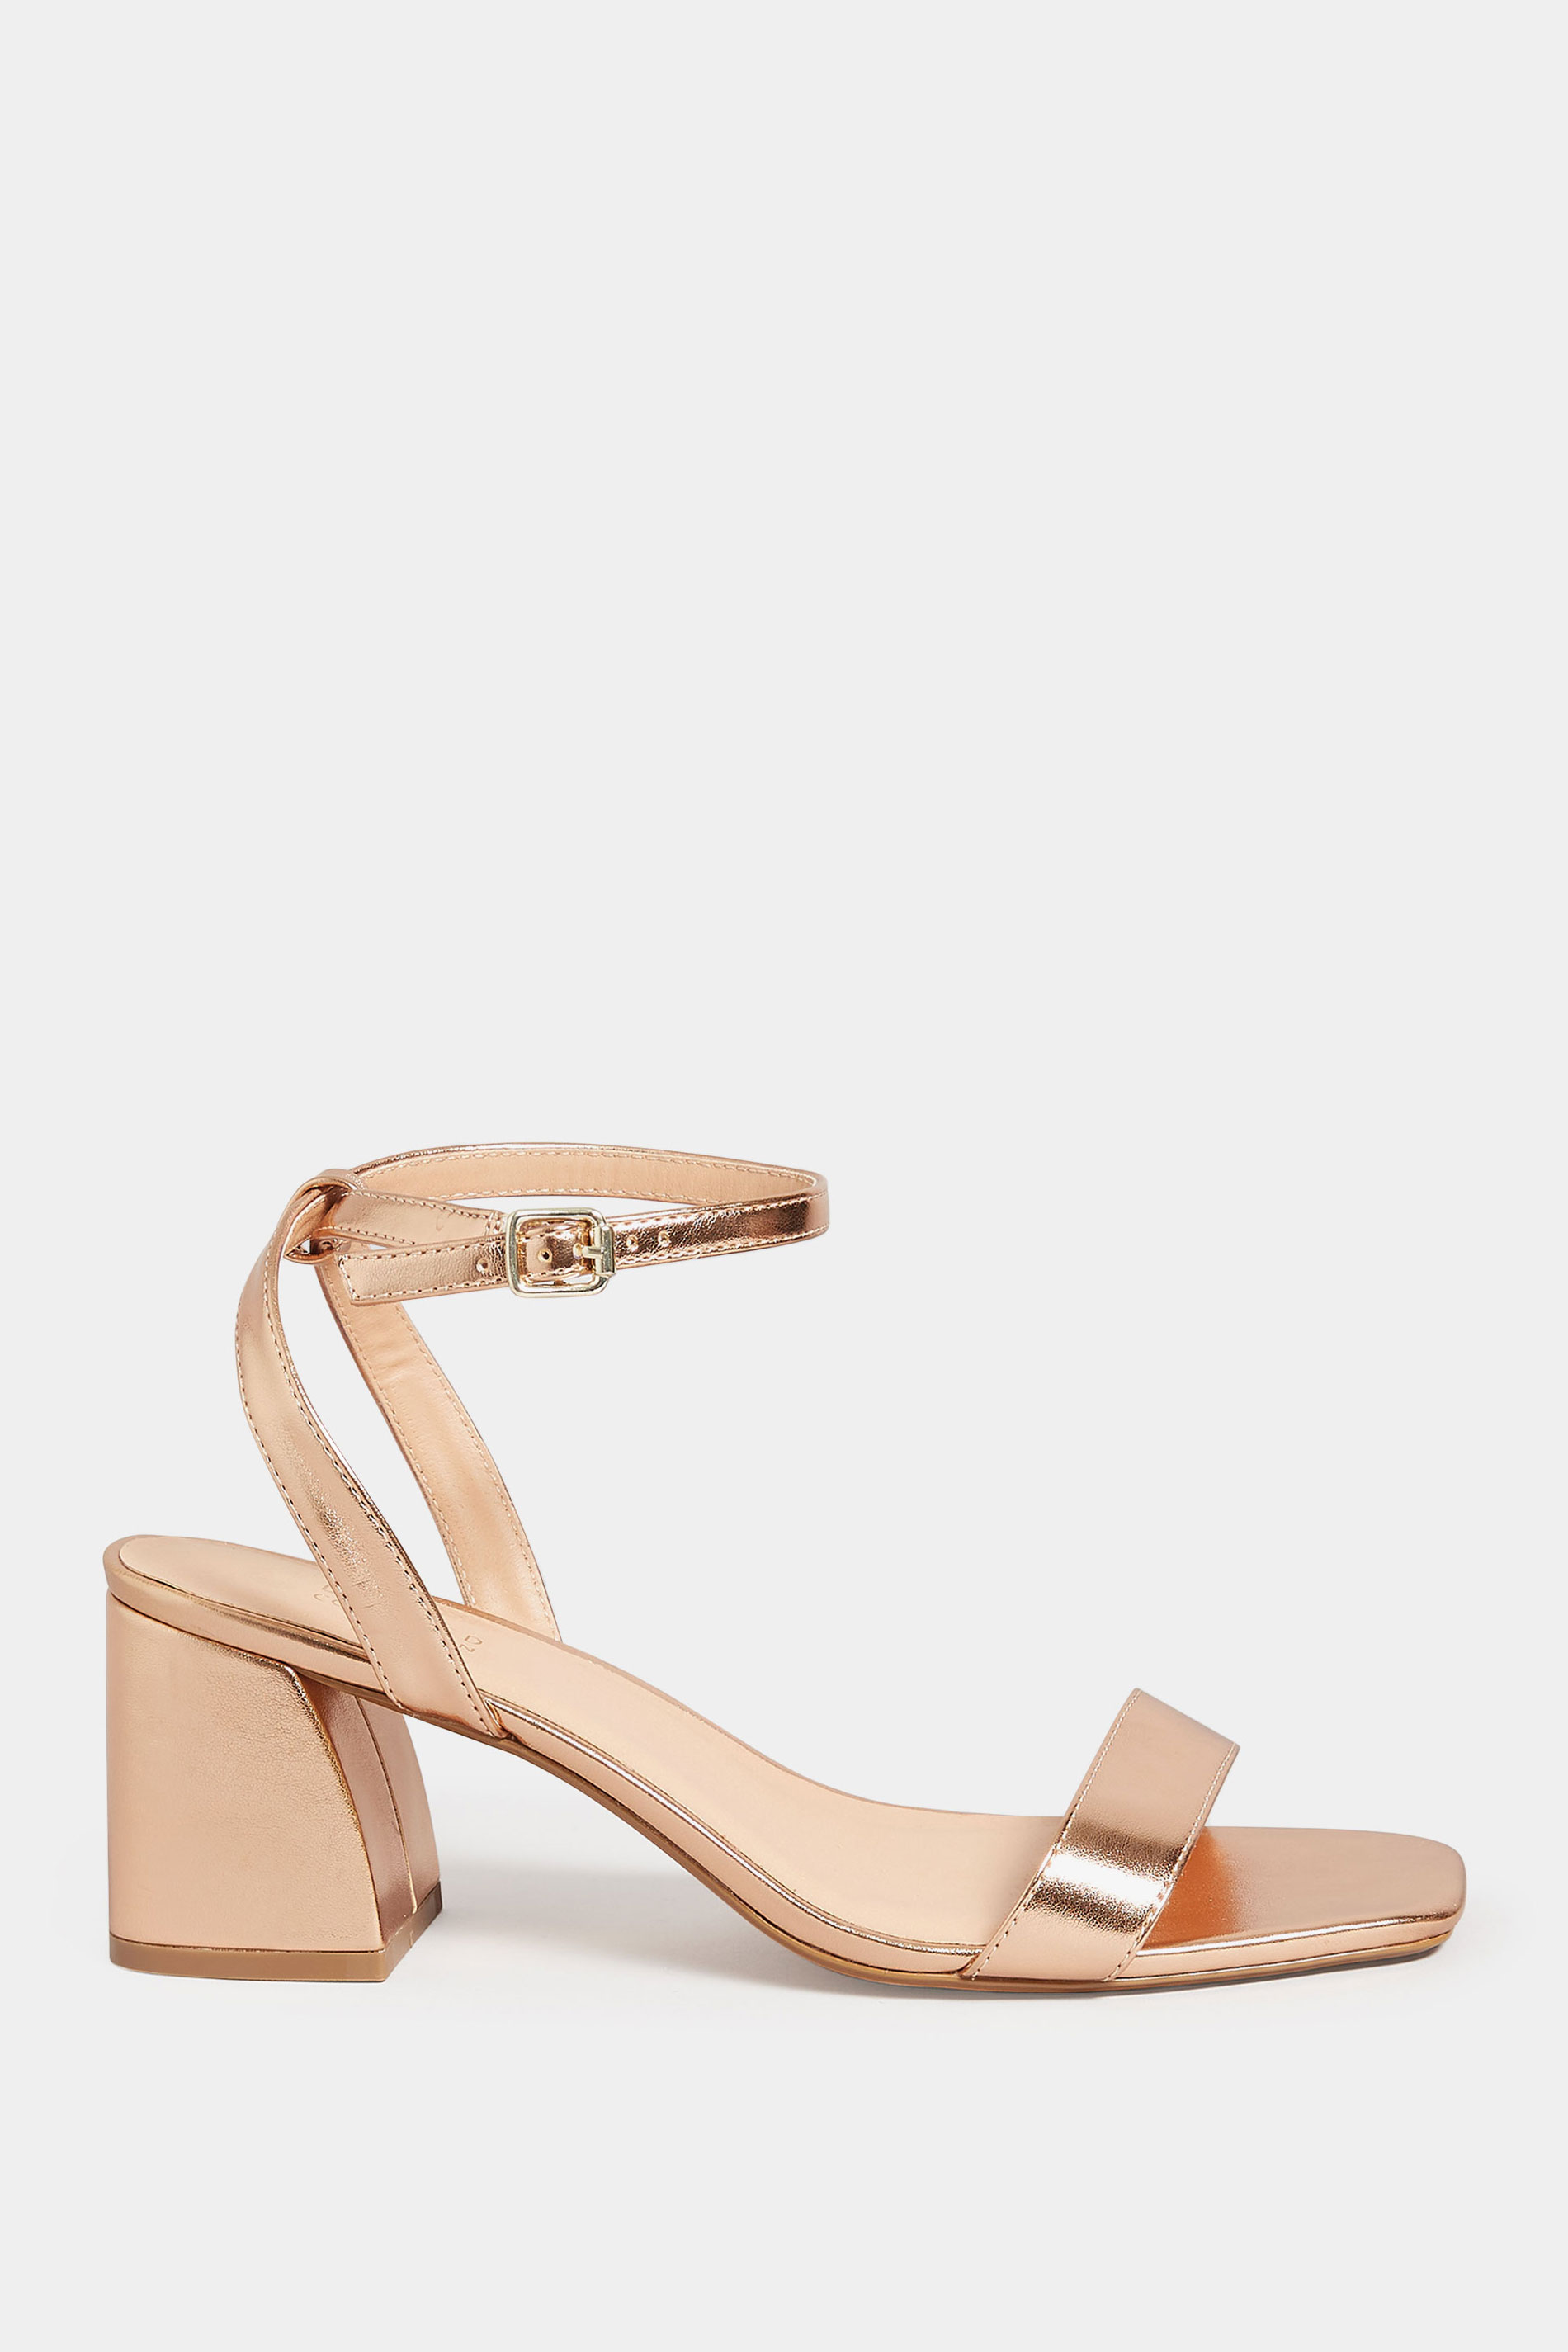 LIMITED COLLECTION Rose Gold Block Heel Sandals In Wide E Fit & Extra Wide EEE Fit | Yours Clothing 3